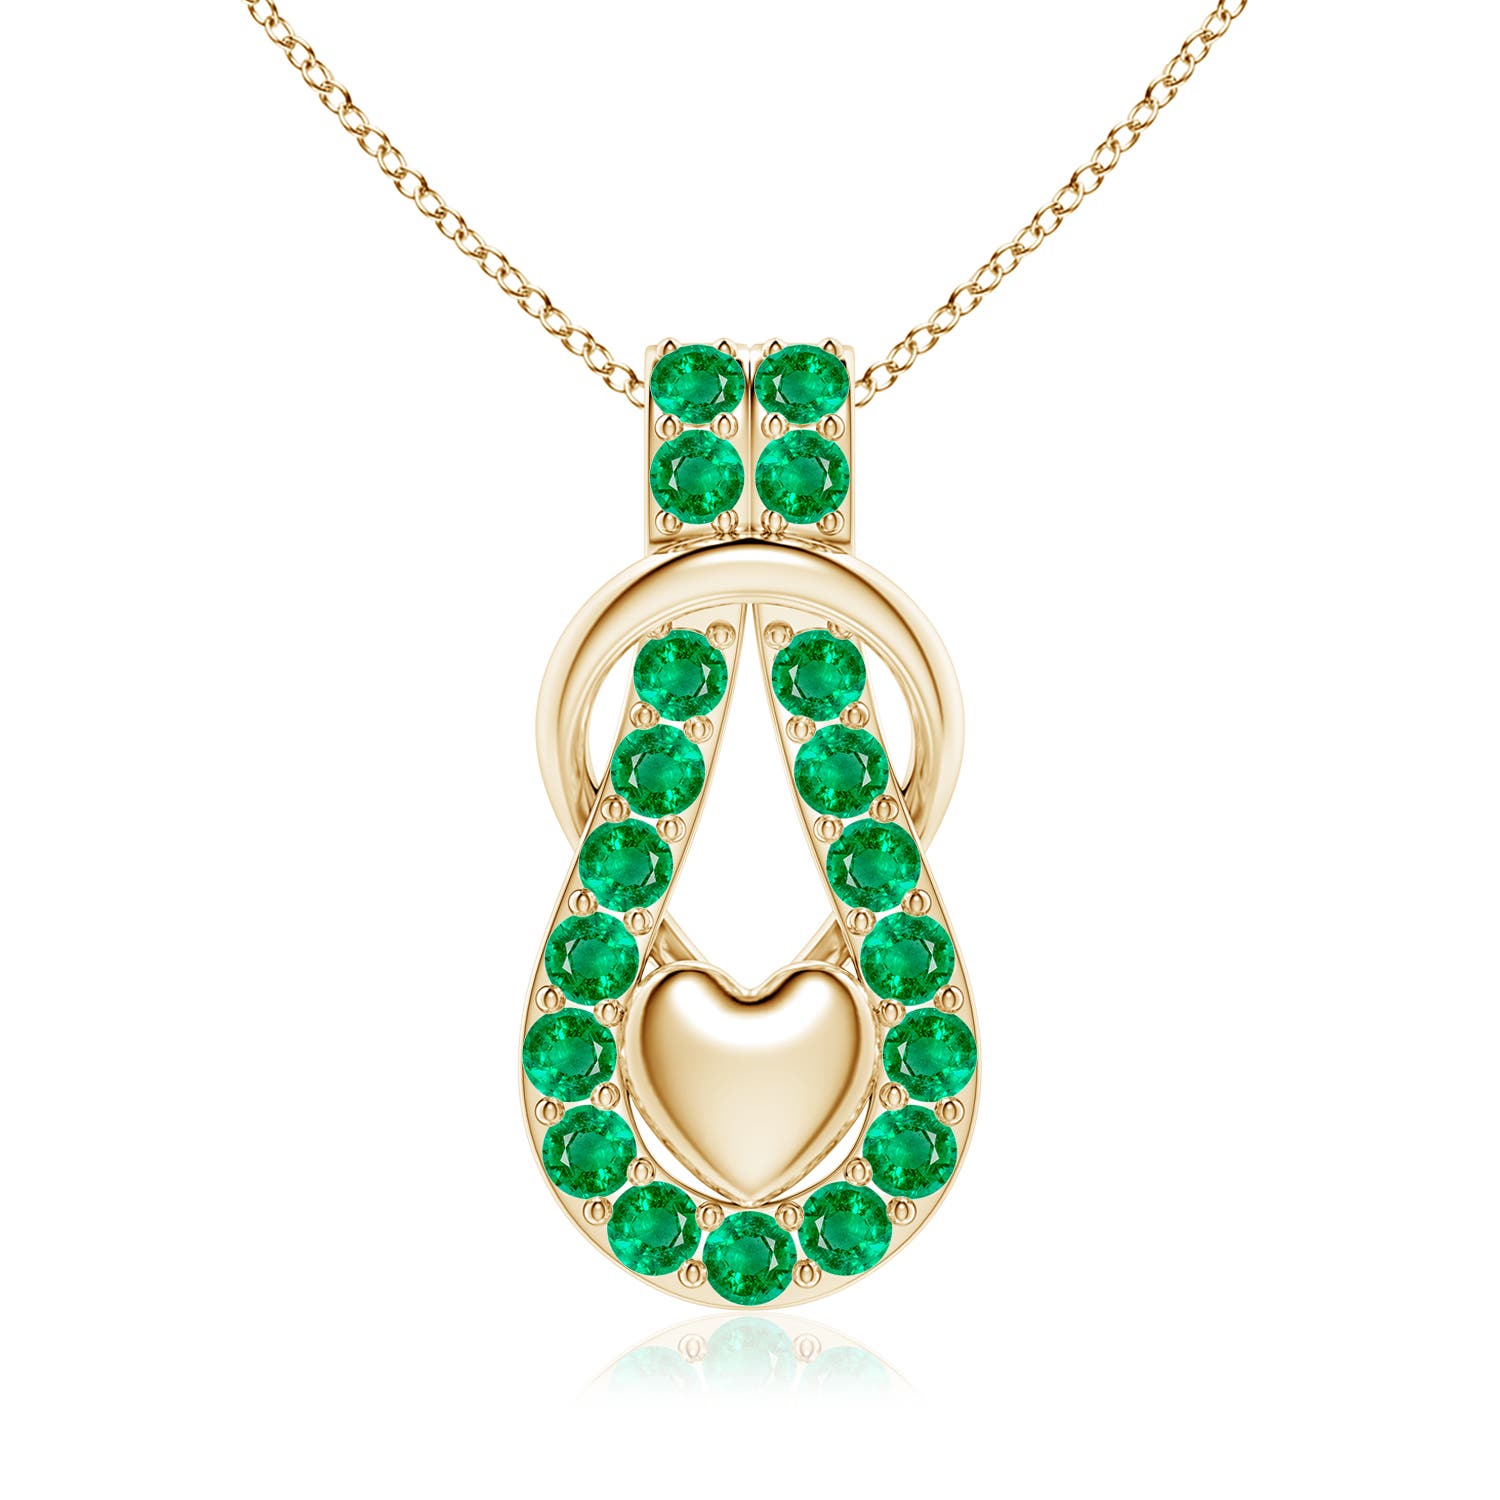 AAA - Emerald / 2.85 CT / 14 KT Yellow Gold